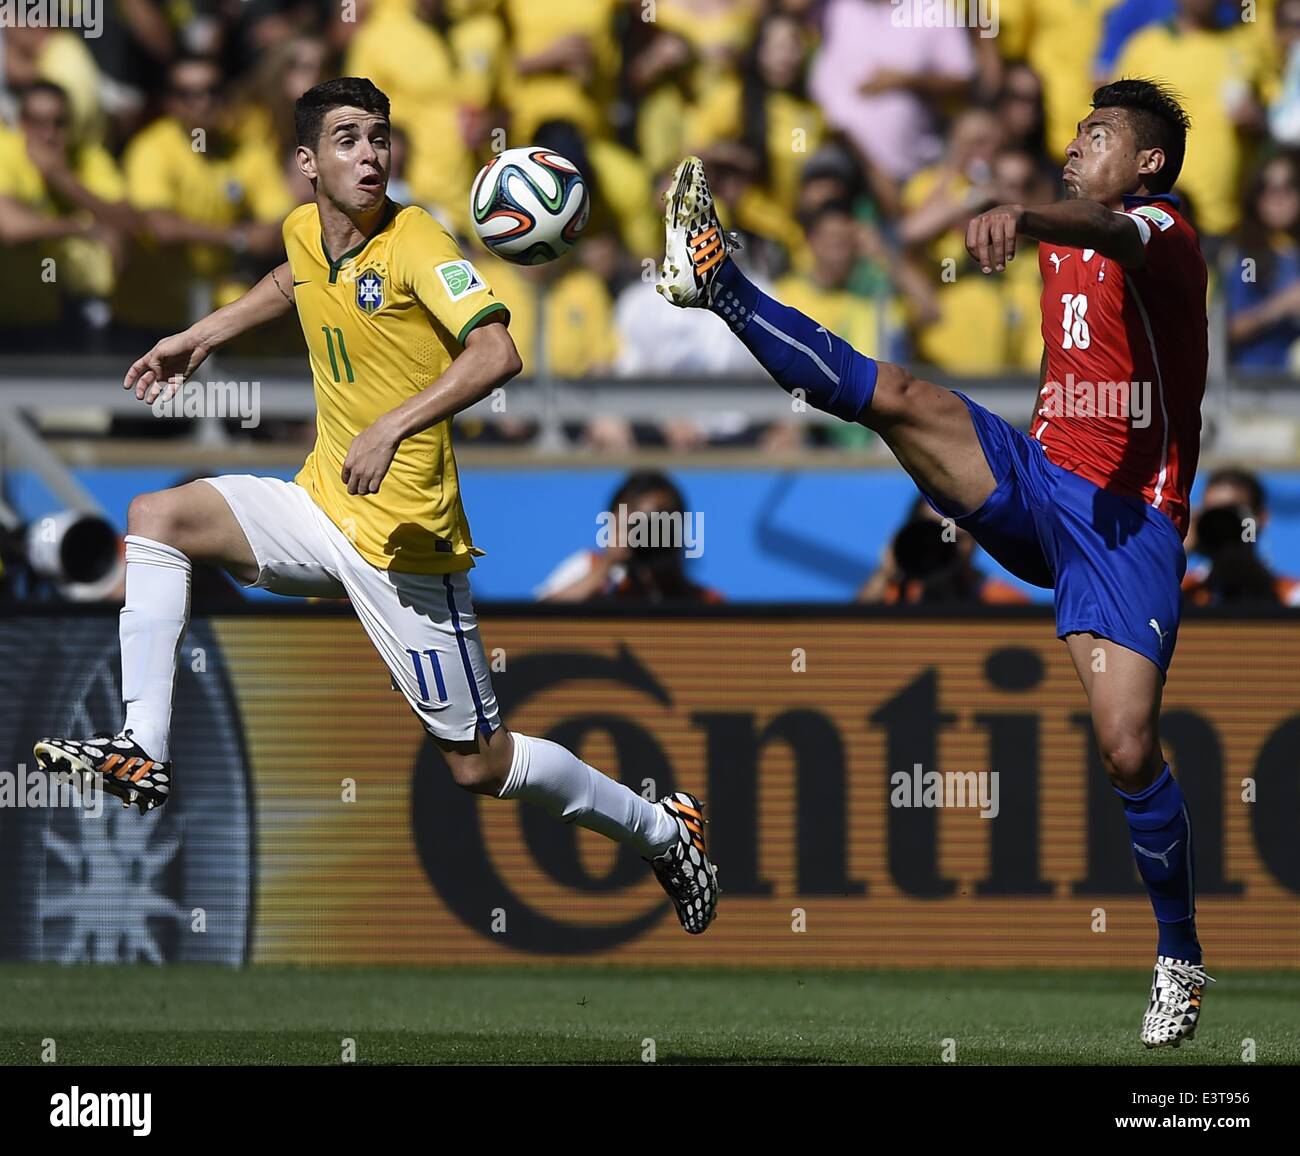 Belo Horizonte, Brazil. 28th June, 2014. Brazil's Oscar (L) vies with Chile's Gonzalo Jara during a Round of 16 match between Brazil and Chile of 2014 FIFA World Cup at the Estadio Mineirao Stadium in Belo Horizonte, Brazil, on June 28, 2014. Credit:  Qi Heng/Xinhua/Alamy Live News Stock Photo